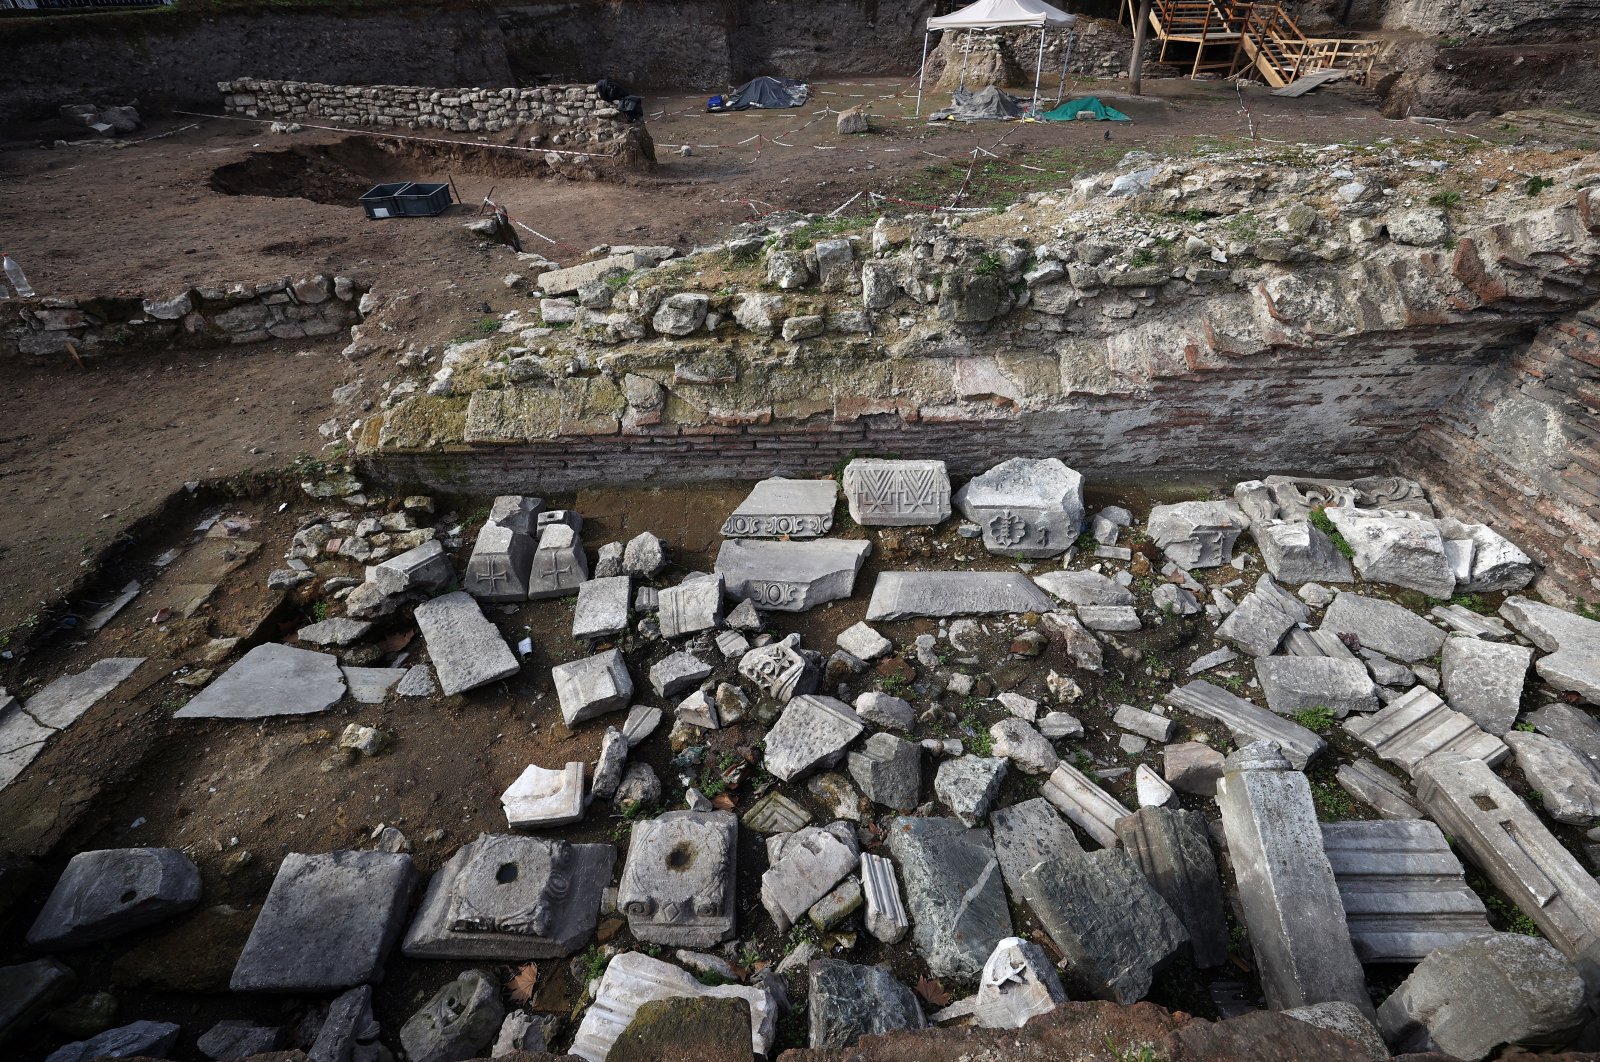 The remains of the St. Polyeuktos Church, which is considered one of the most important structures of the Eastern Roman Empire, built about 1,500 years ago, are being uncovered through archaeological excavations in Saraçhane, Istanbul, Türkiye, Feb. 2, 2023. (AA Photo)